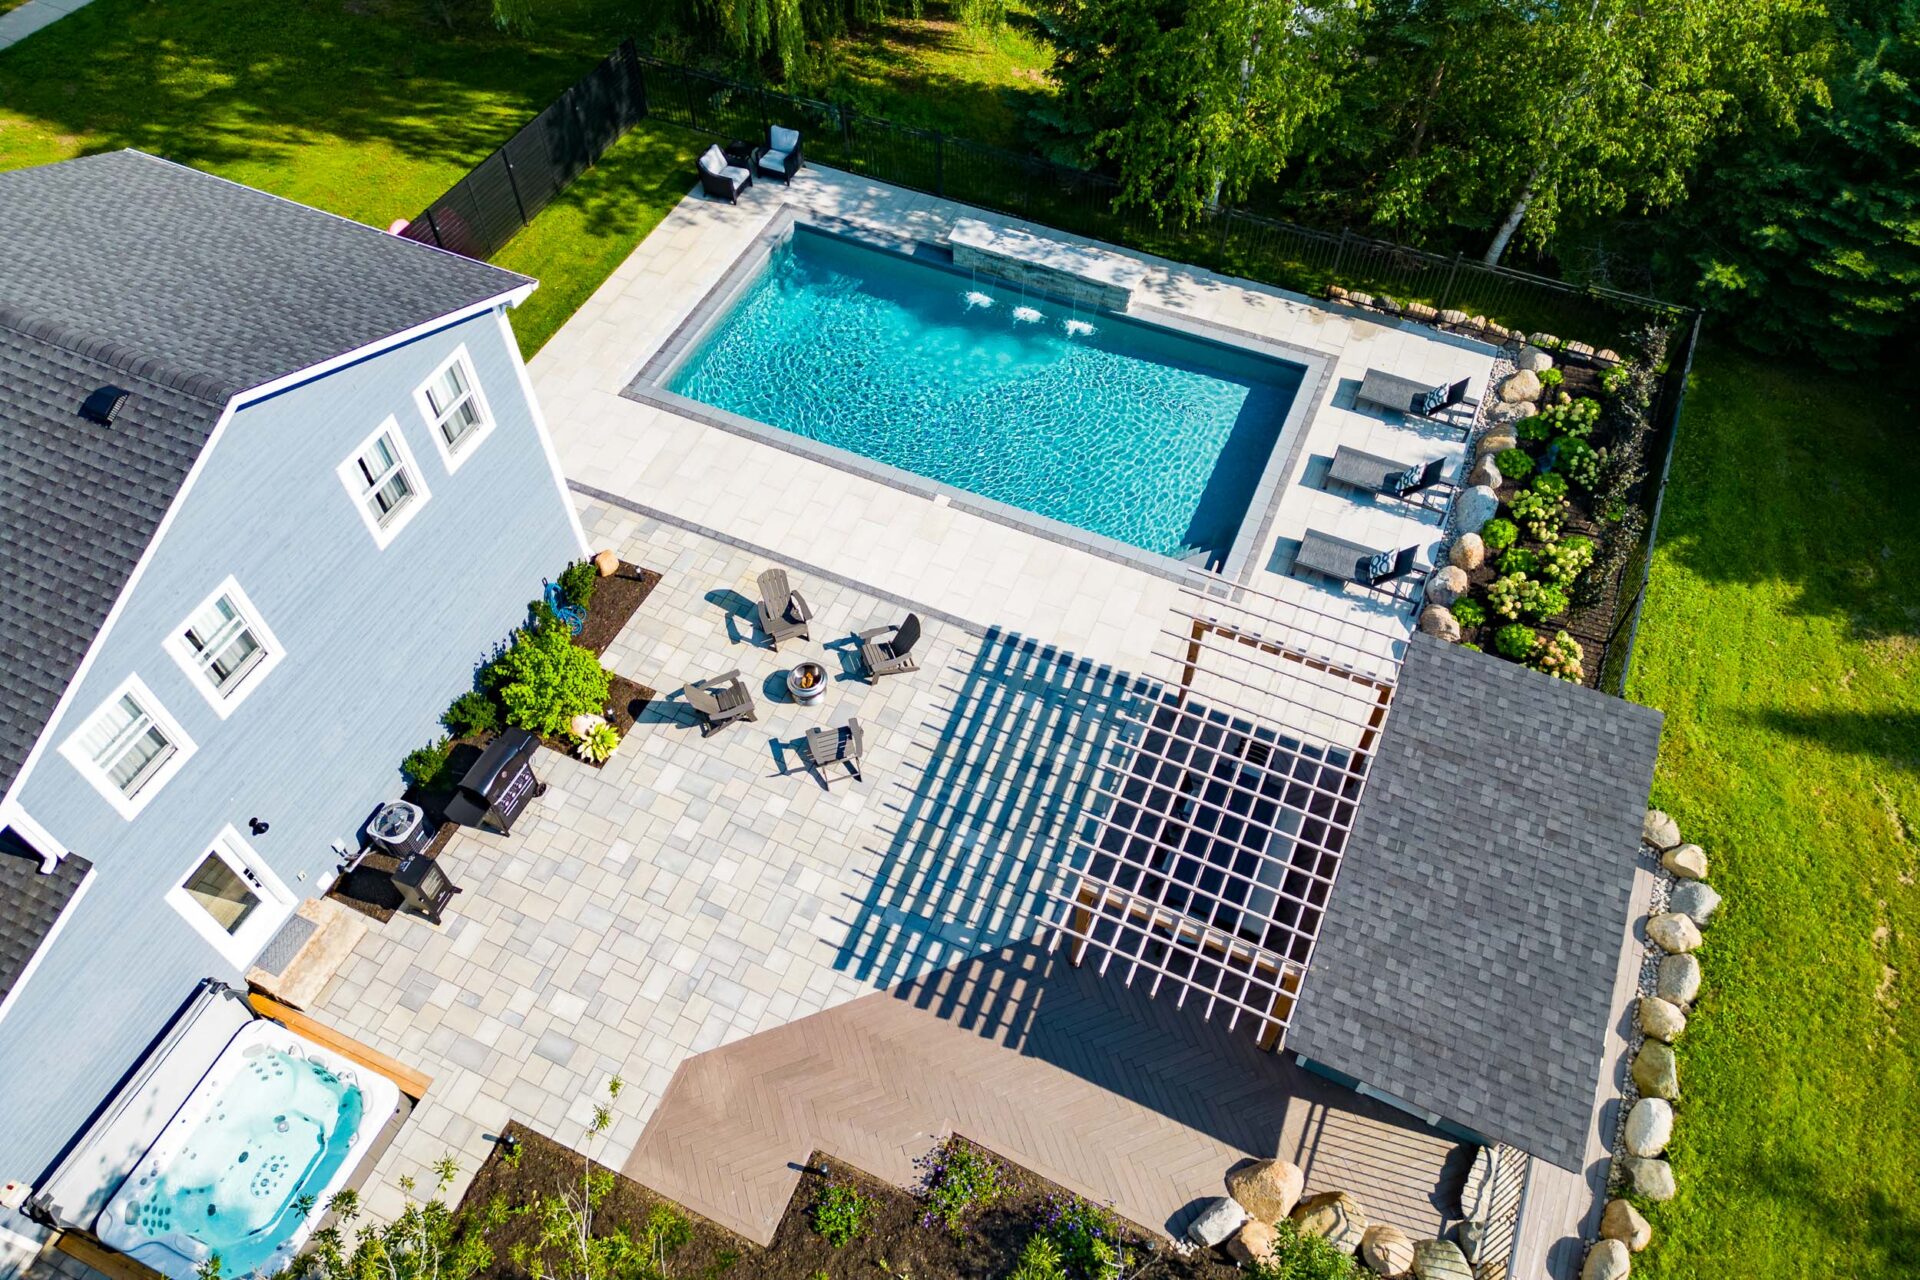 Aerial view of a residential backyard with an inground swimming pool, hot tub, patio area, lounging chairs, and a lush green lawn surrounded by trees.